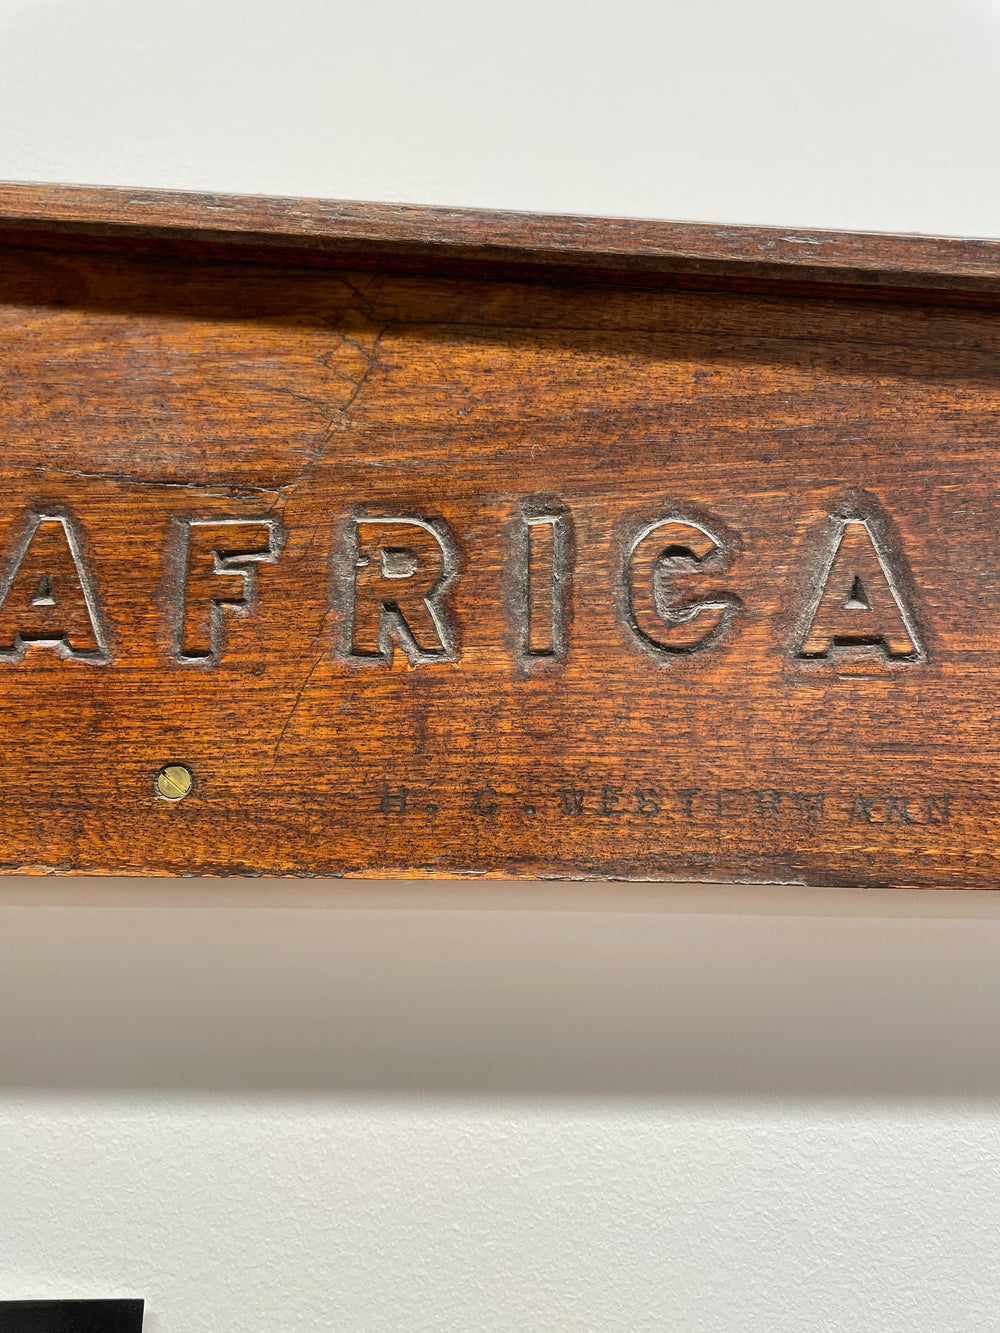 H.C. Westermann rare wall carved wall sculpture  titled "Zebra Wood-Africa" signed and dated 1973